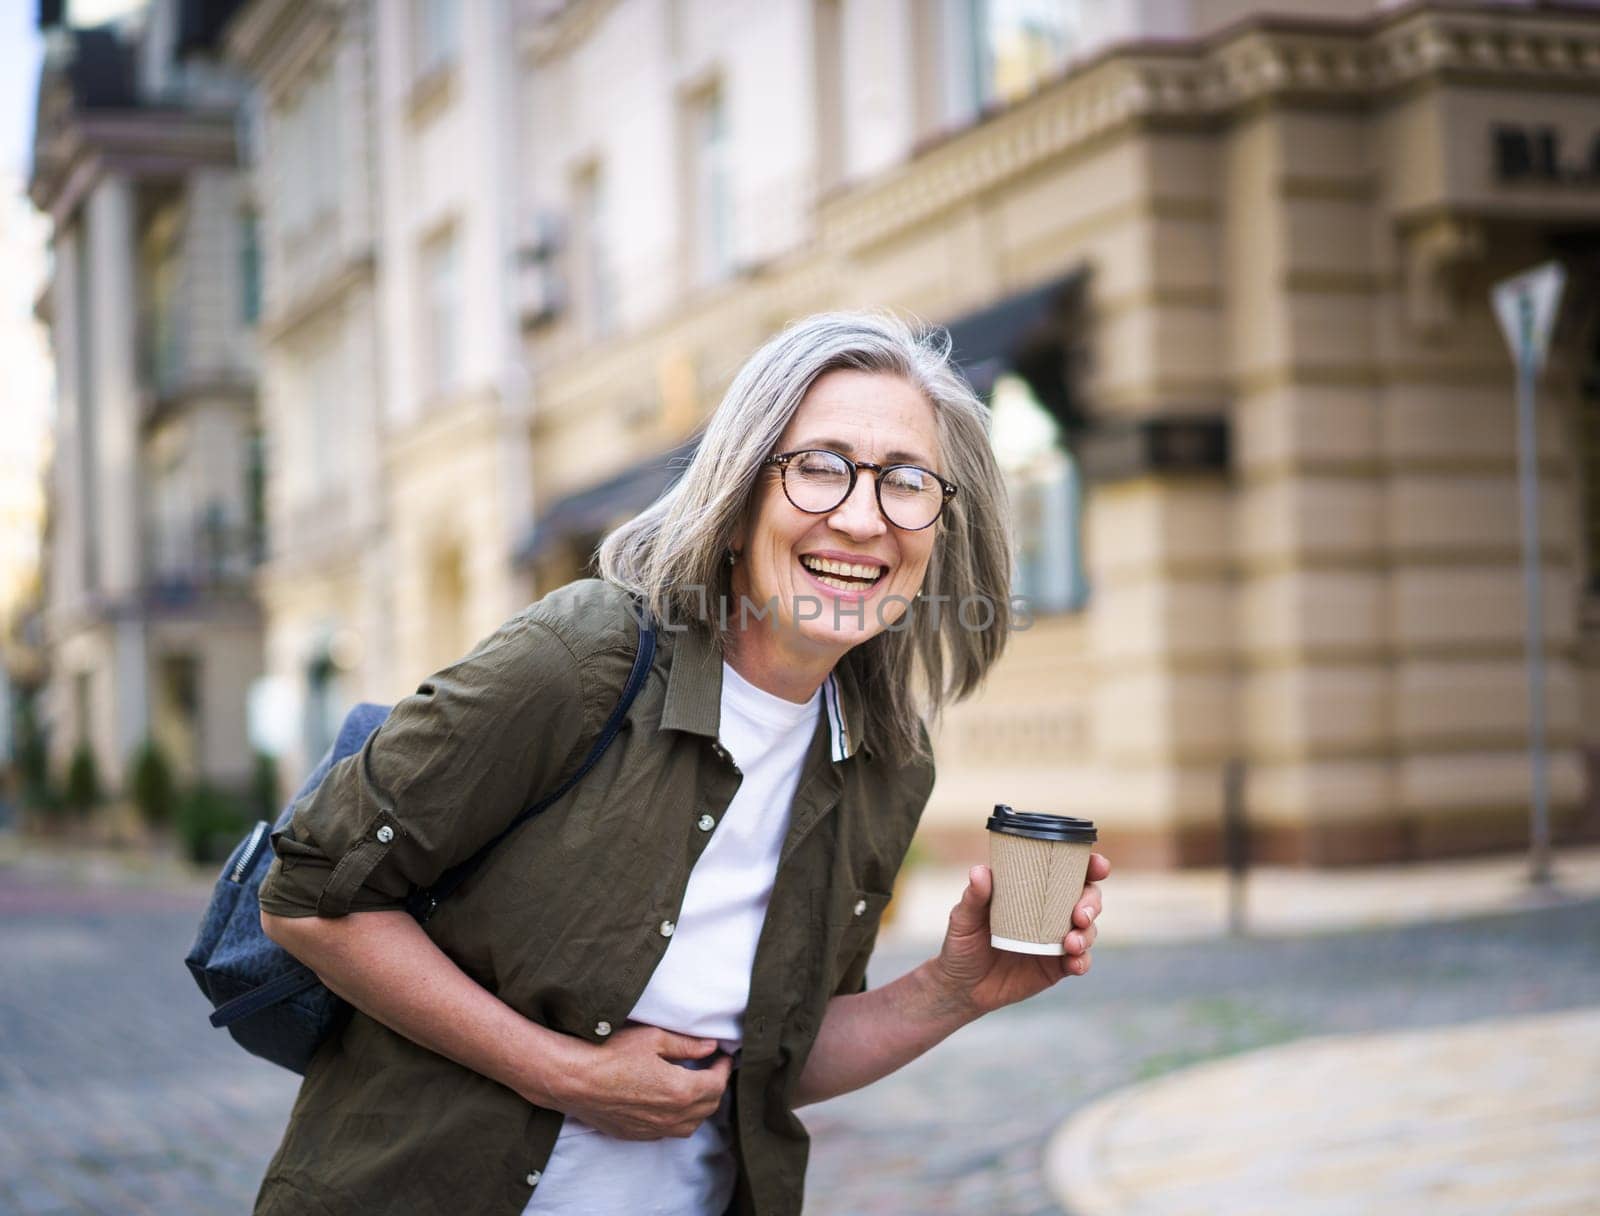 Woman With Glasses Holding a Cup of Coffee by LipikStockMedia